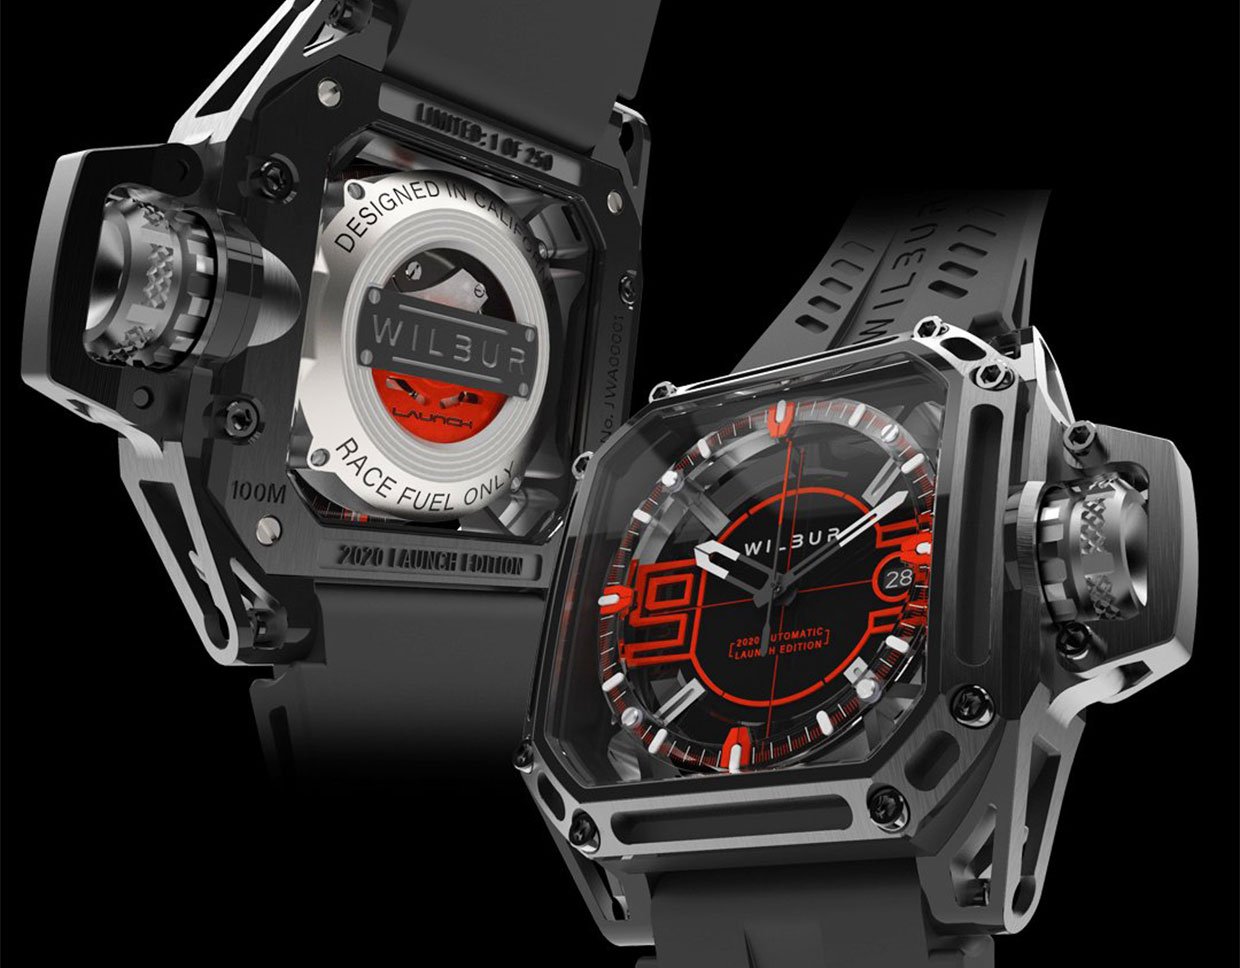 Wilbur Automatic Launch Edition Watches